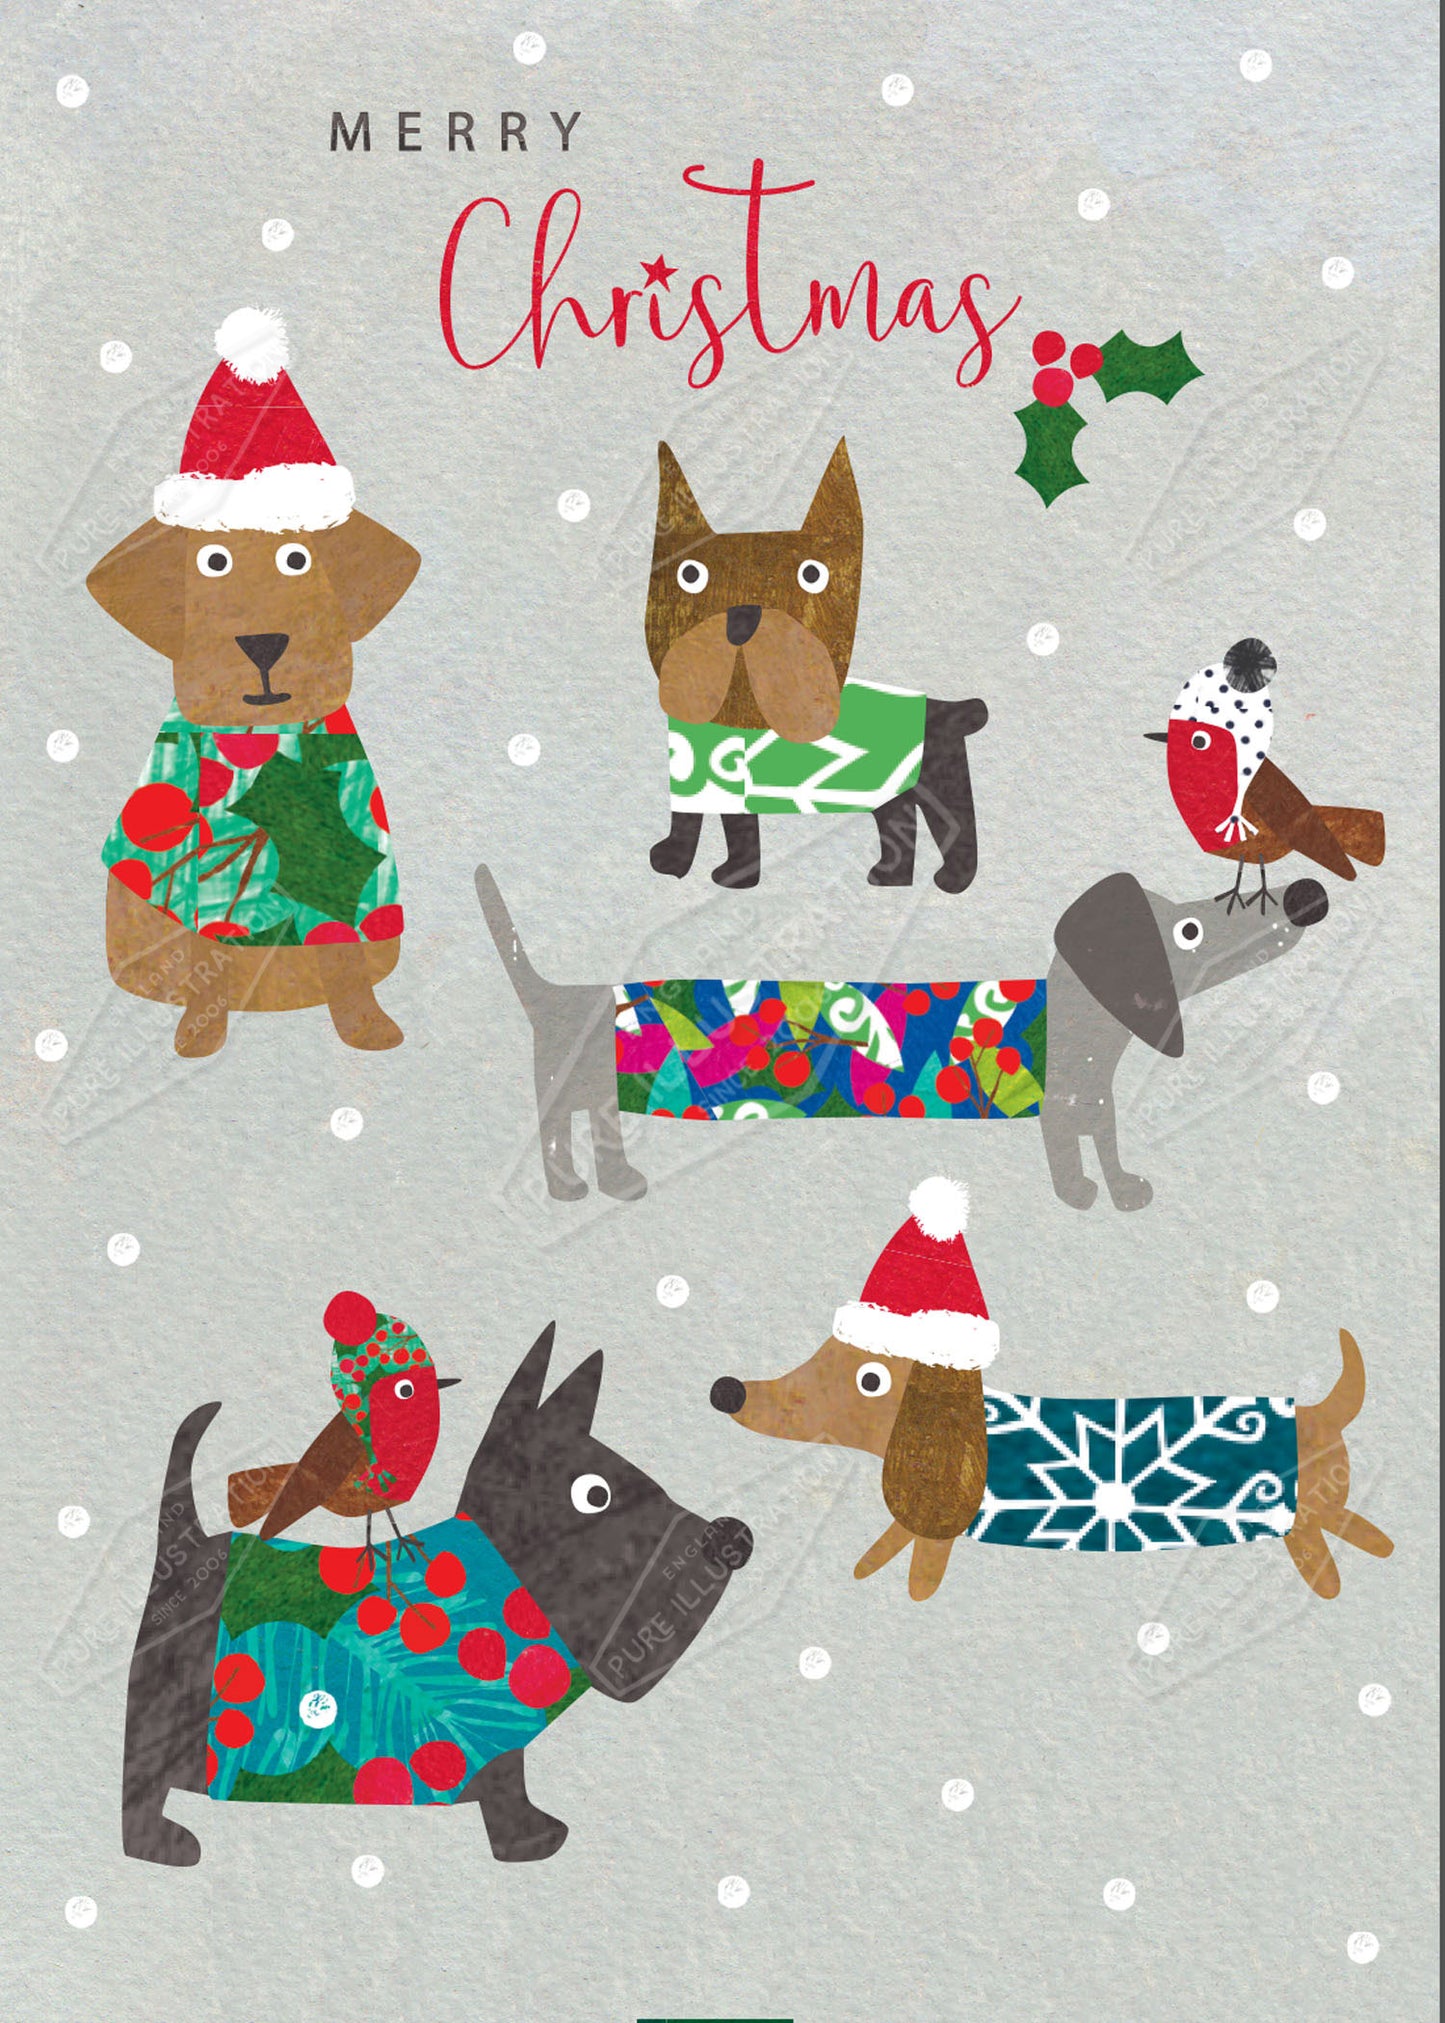 00035077IMC- Isla McDonald is represented by Pure Art Licensing Agency - Christmas Greeting Card Design